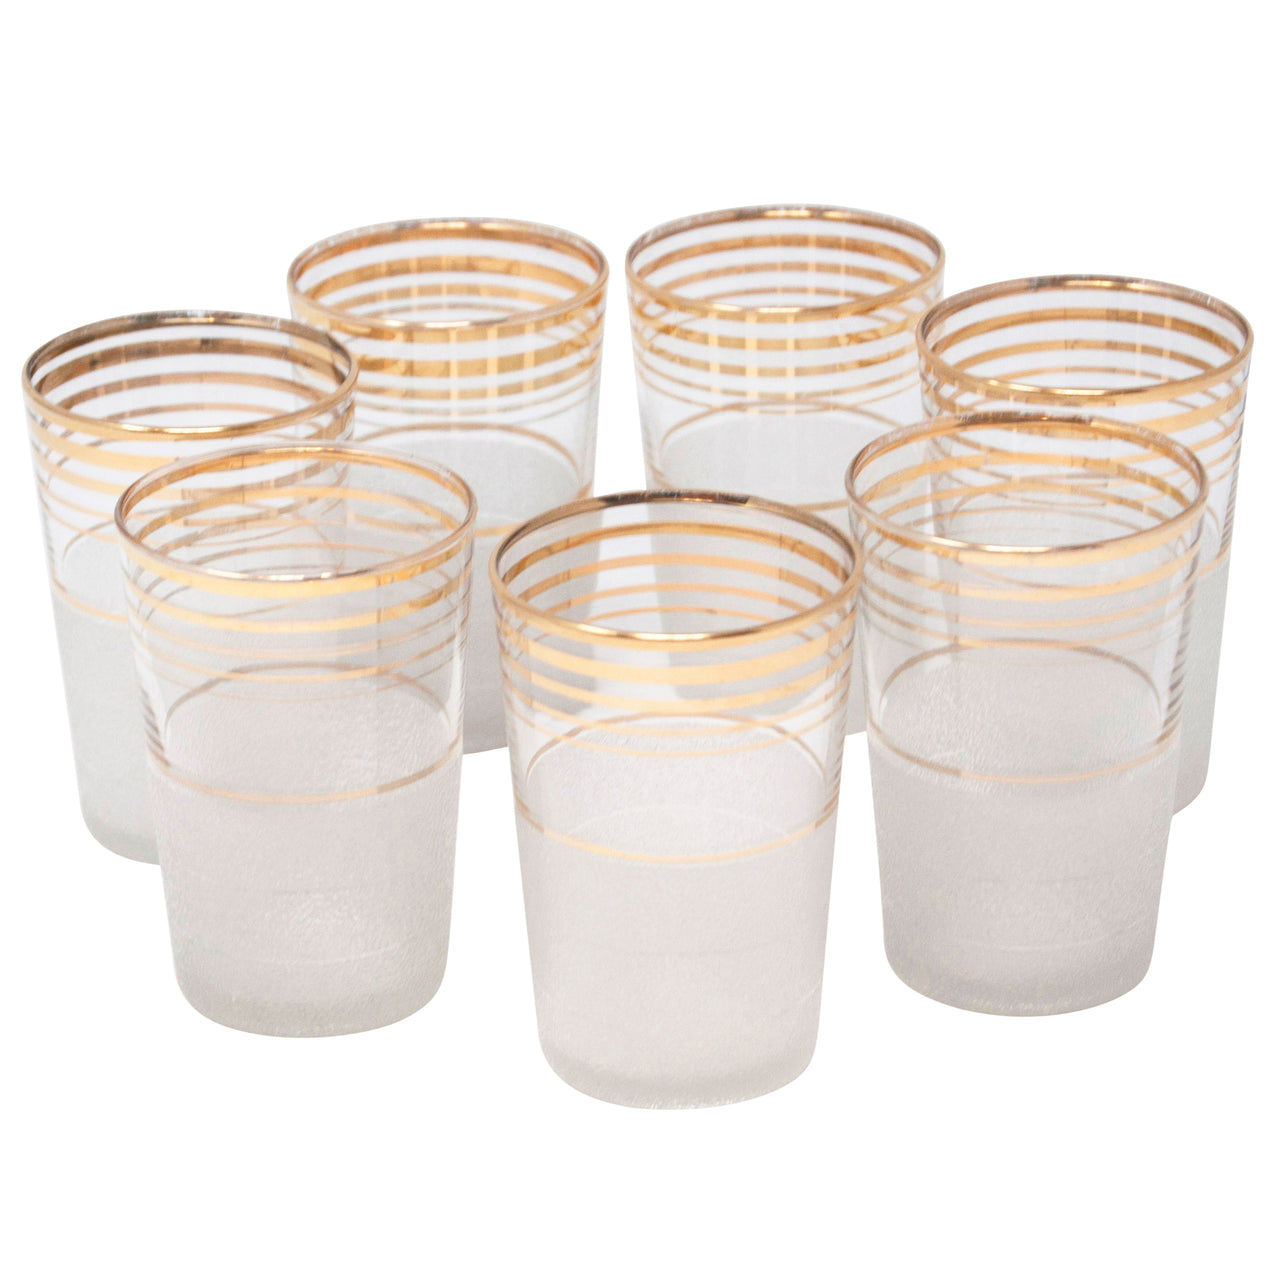 https://thehourshop.com/cdn/shop/products/16524-Vintage-Gold-Rings-Frosted-Tumblers_1280x1280.jpg?v=1627078540